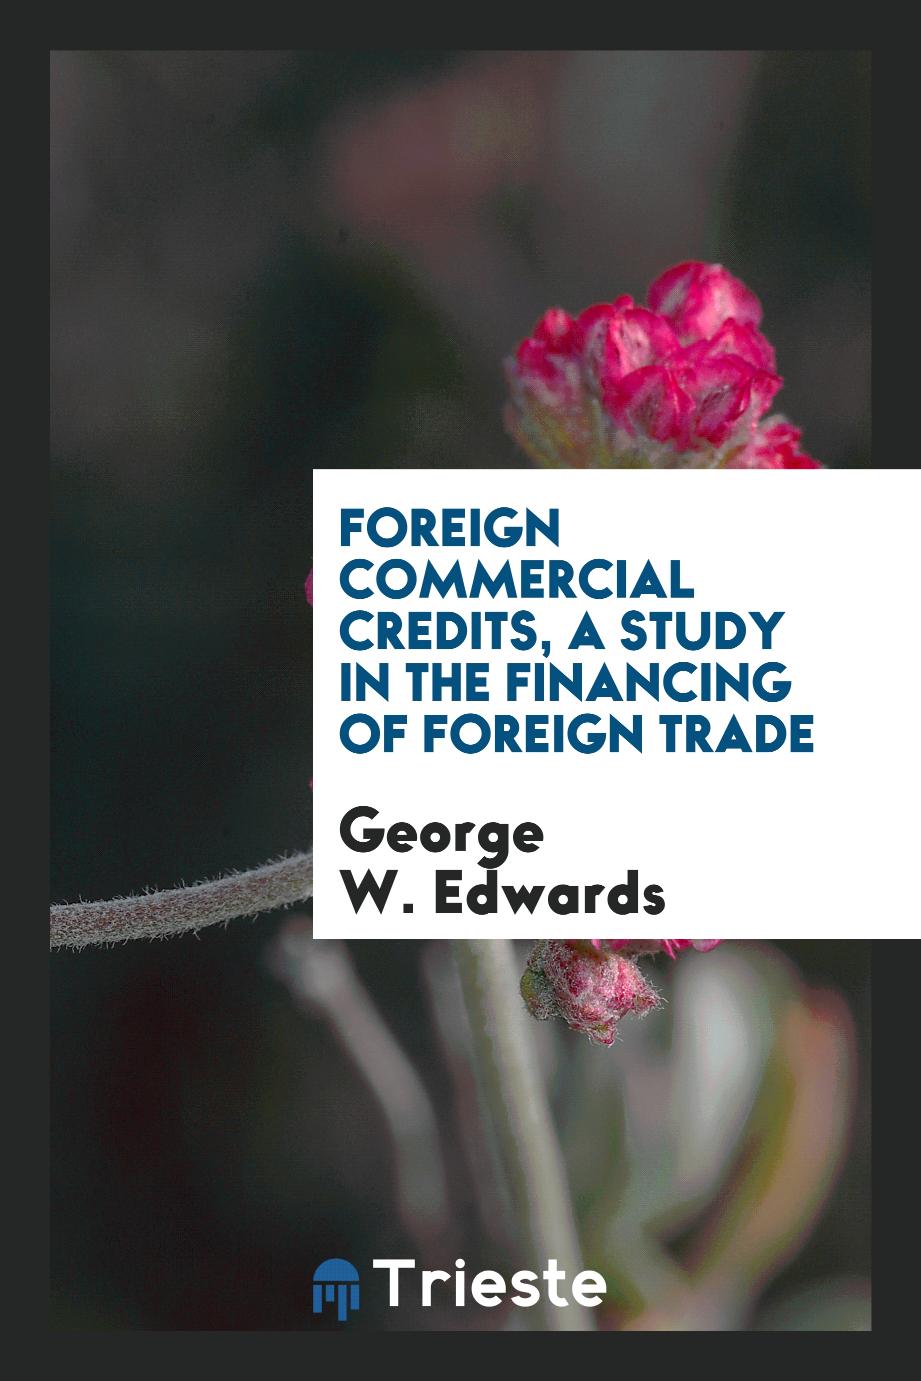 Foreign commercial credits, a study in the financing of foreign trade